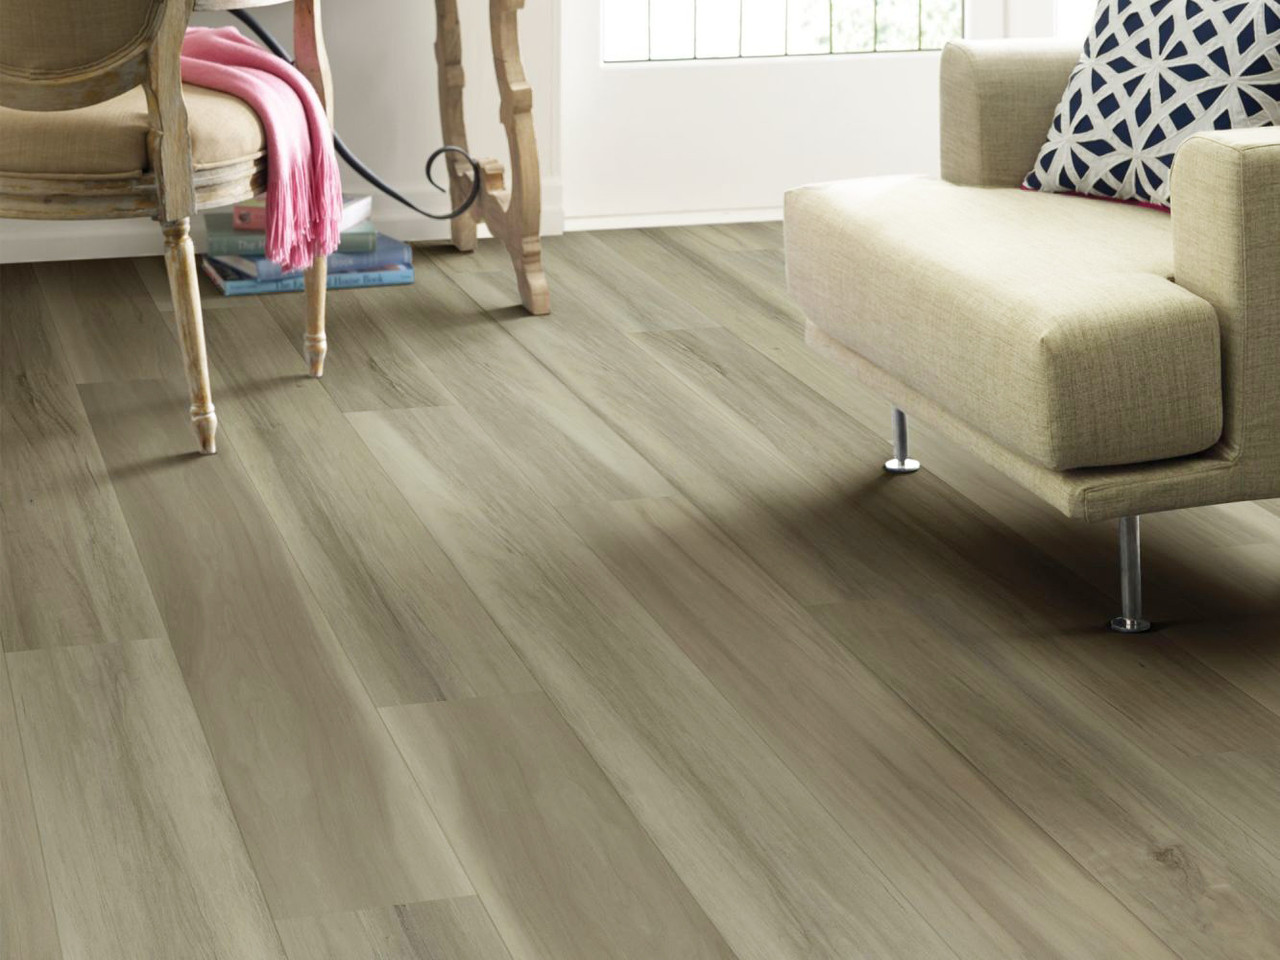 Nobility Plus Floorte Pro 7 Series is the Perfect Choice for Budget-Conscious Homeowners